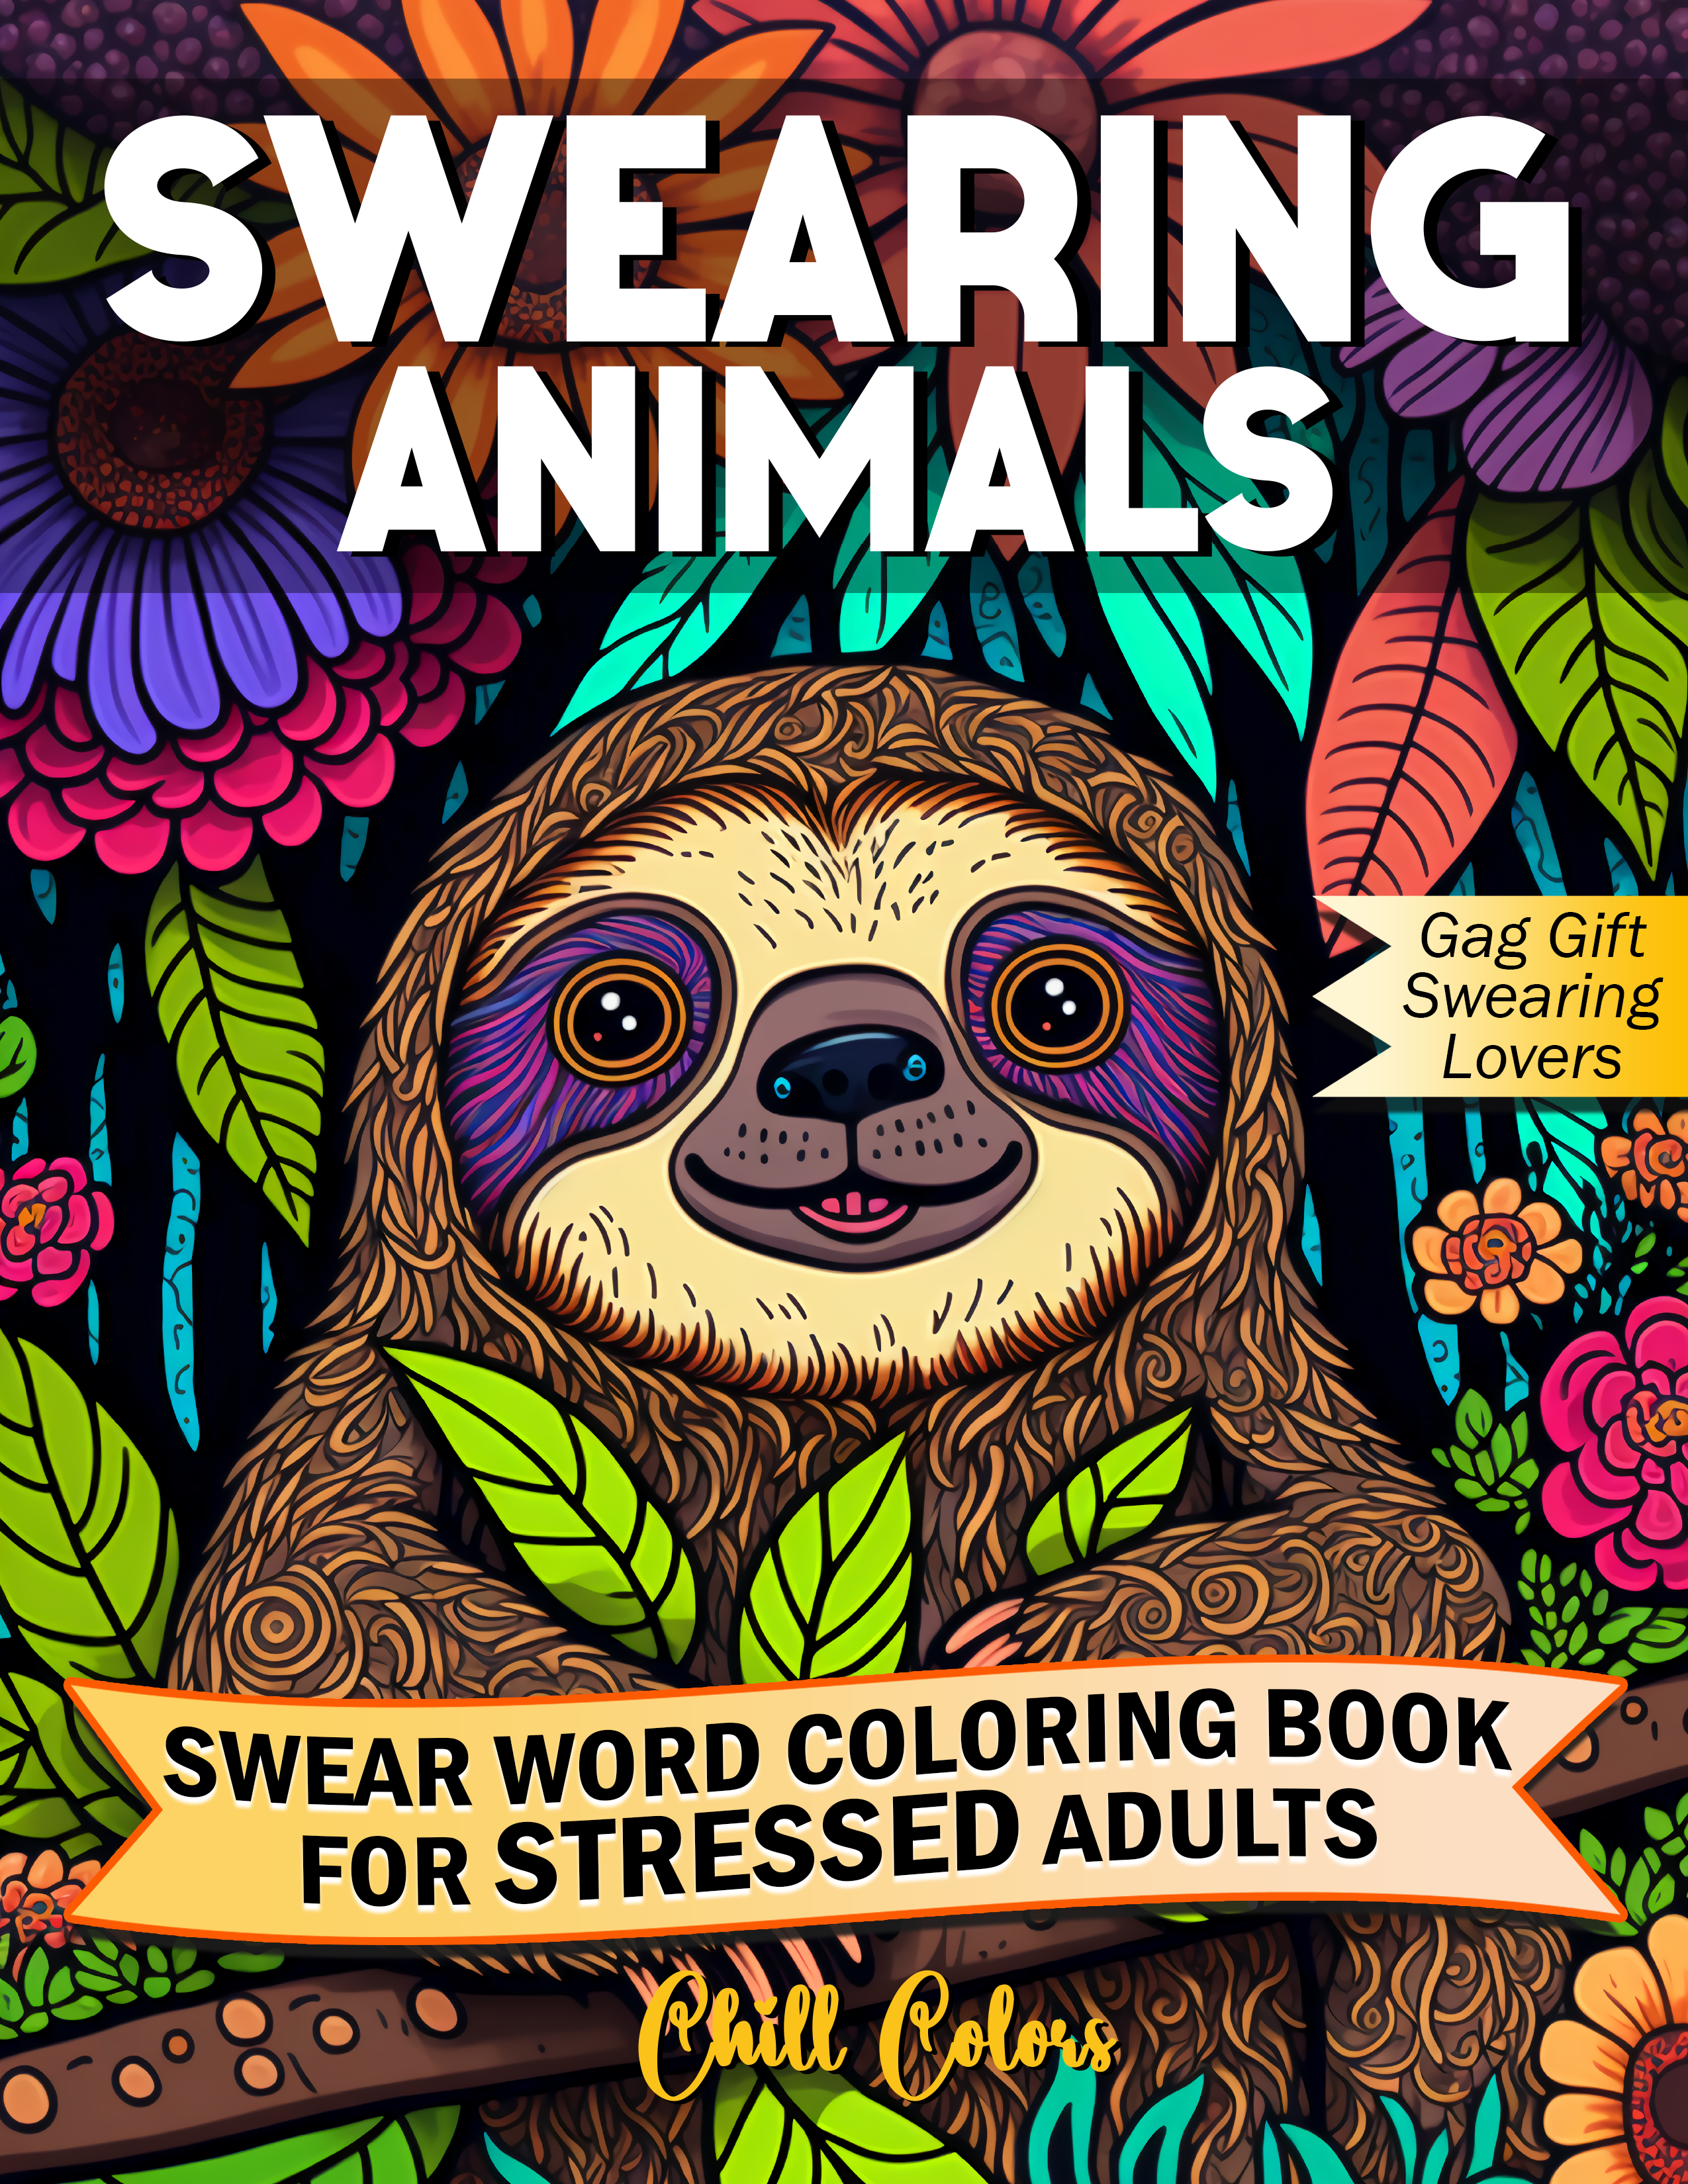 Swearing Animals Coloring Book for Adults